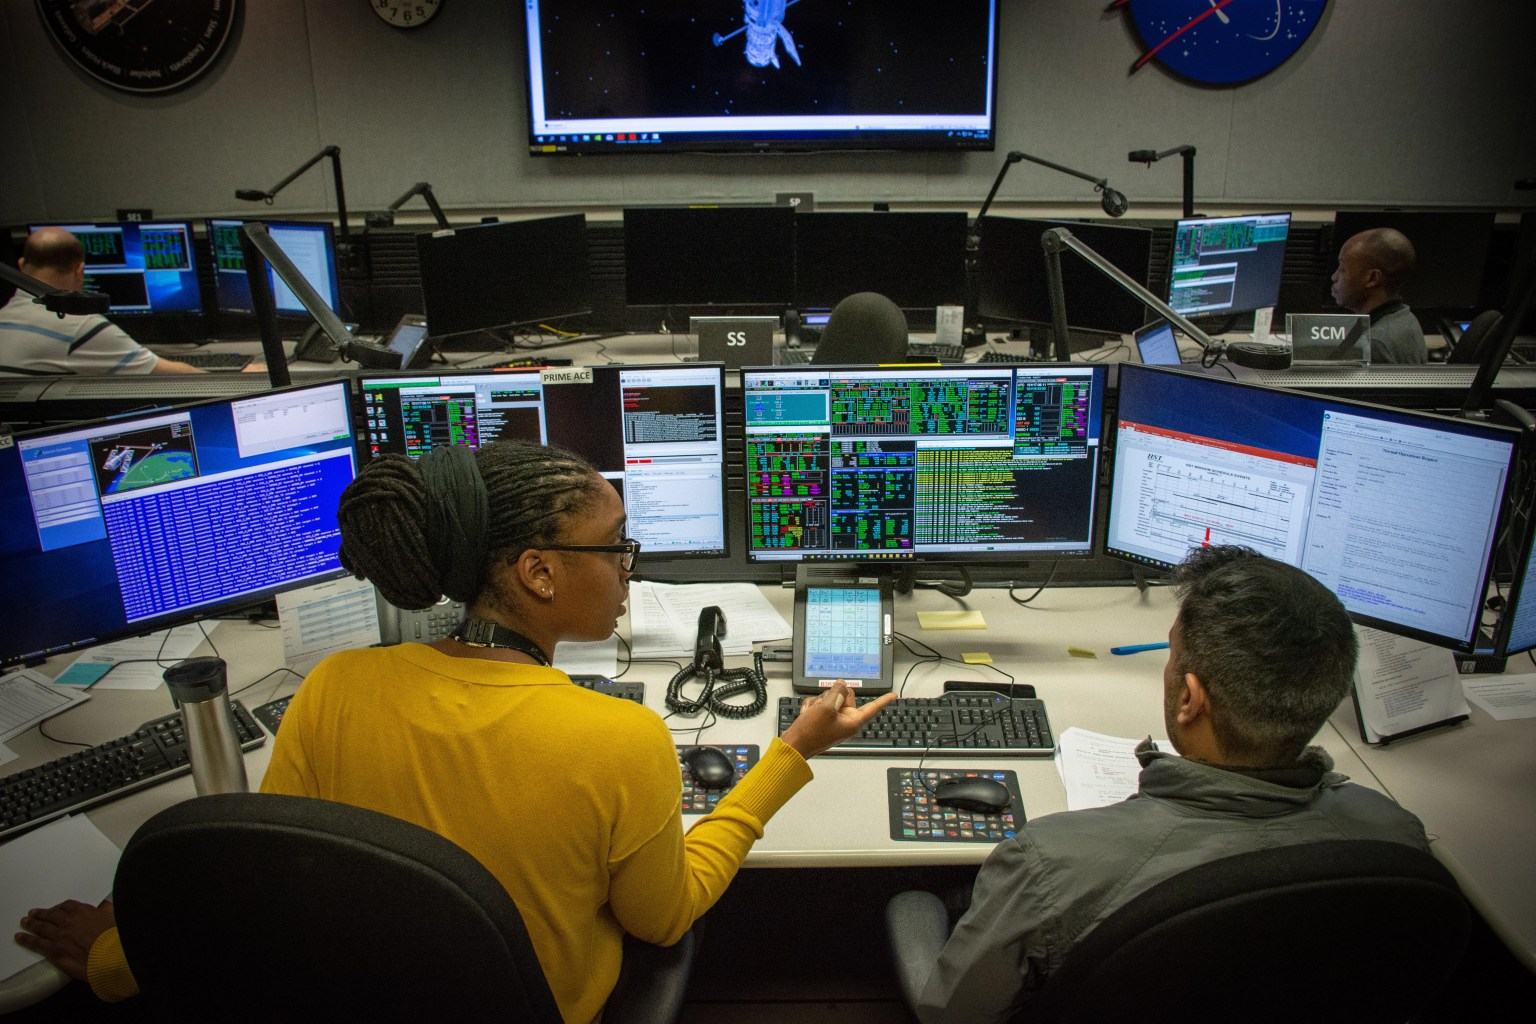 A photograph of a man and woman sitting in Hubble's "Space Telescope Operations Control Center" also called the STOCC. They are sitting next to each other, with many computer screens with data and information from the spacecraft.